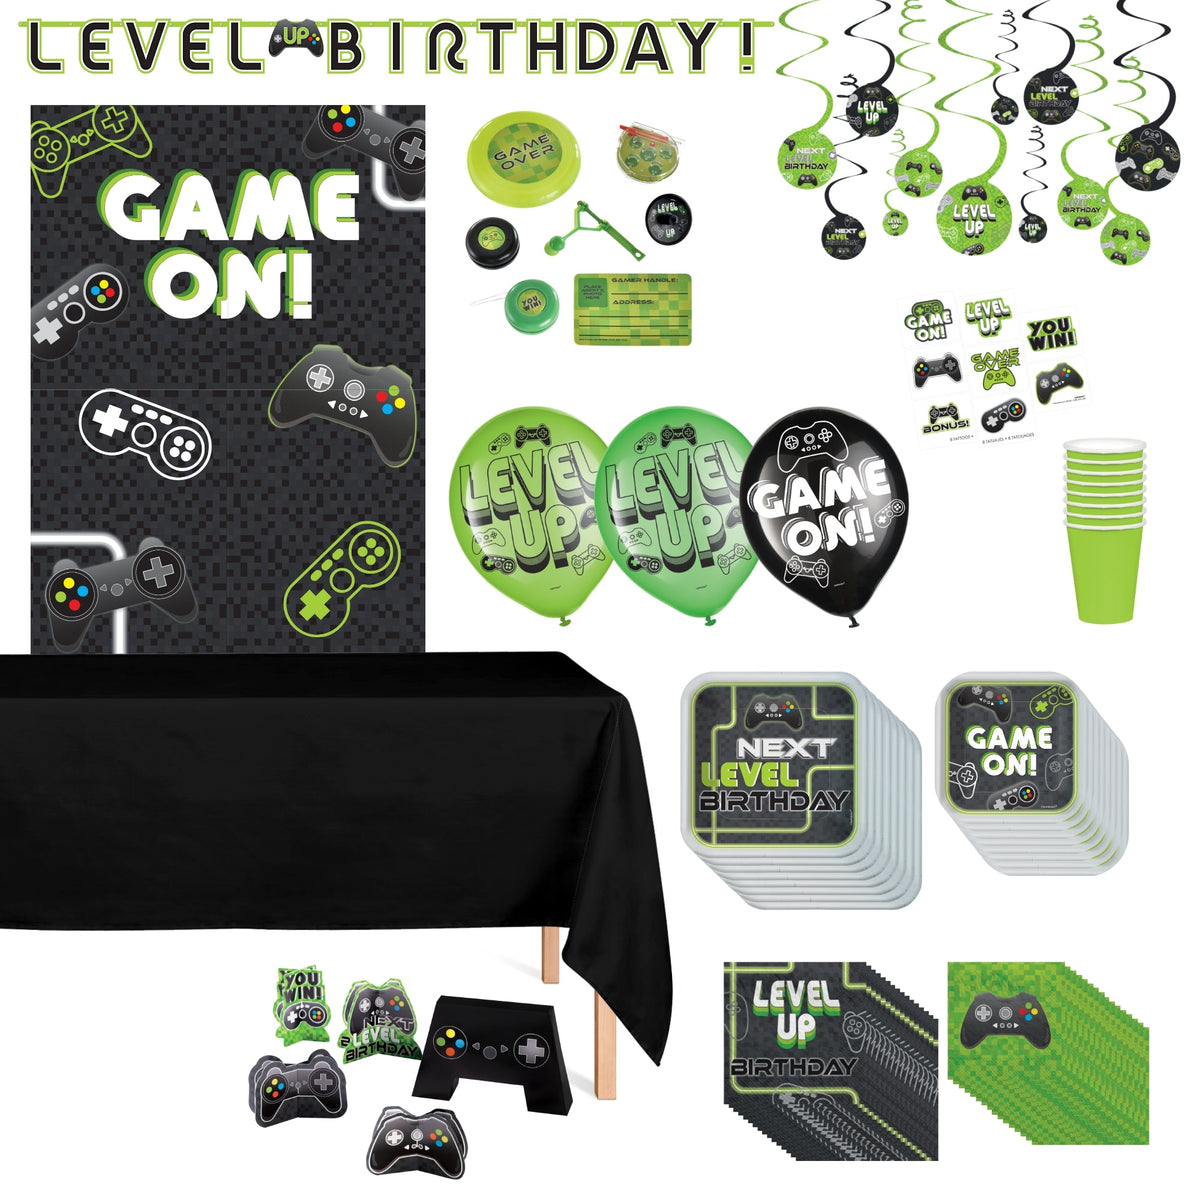 Party Expert Kids Birthday Level Up Standard Birthday Party Supplies Kit